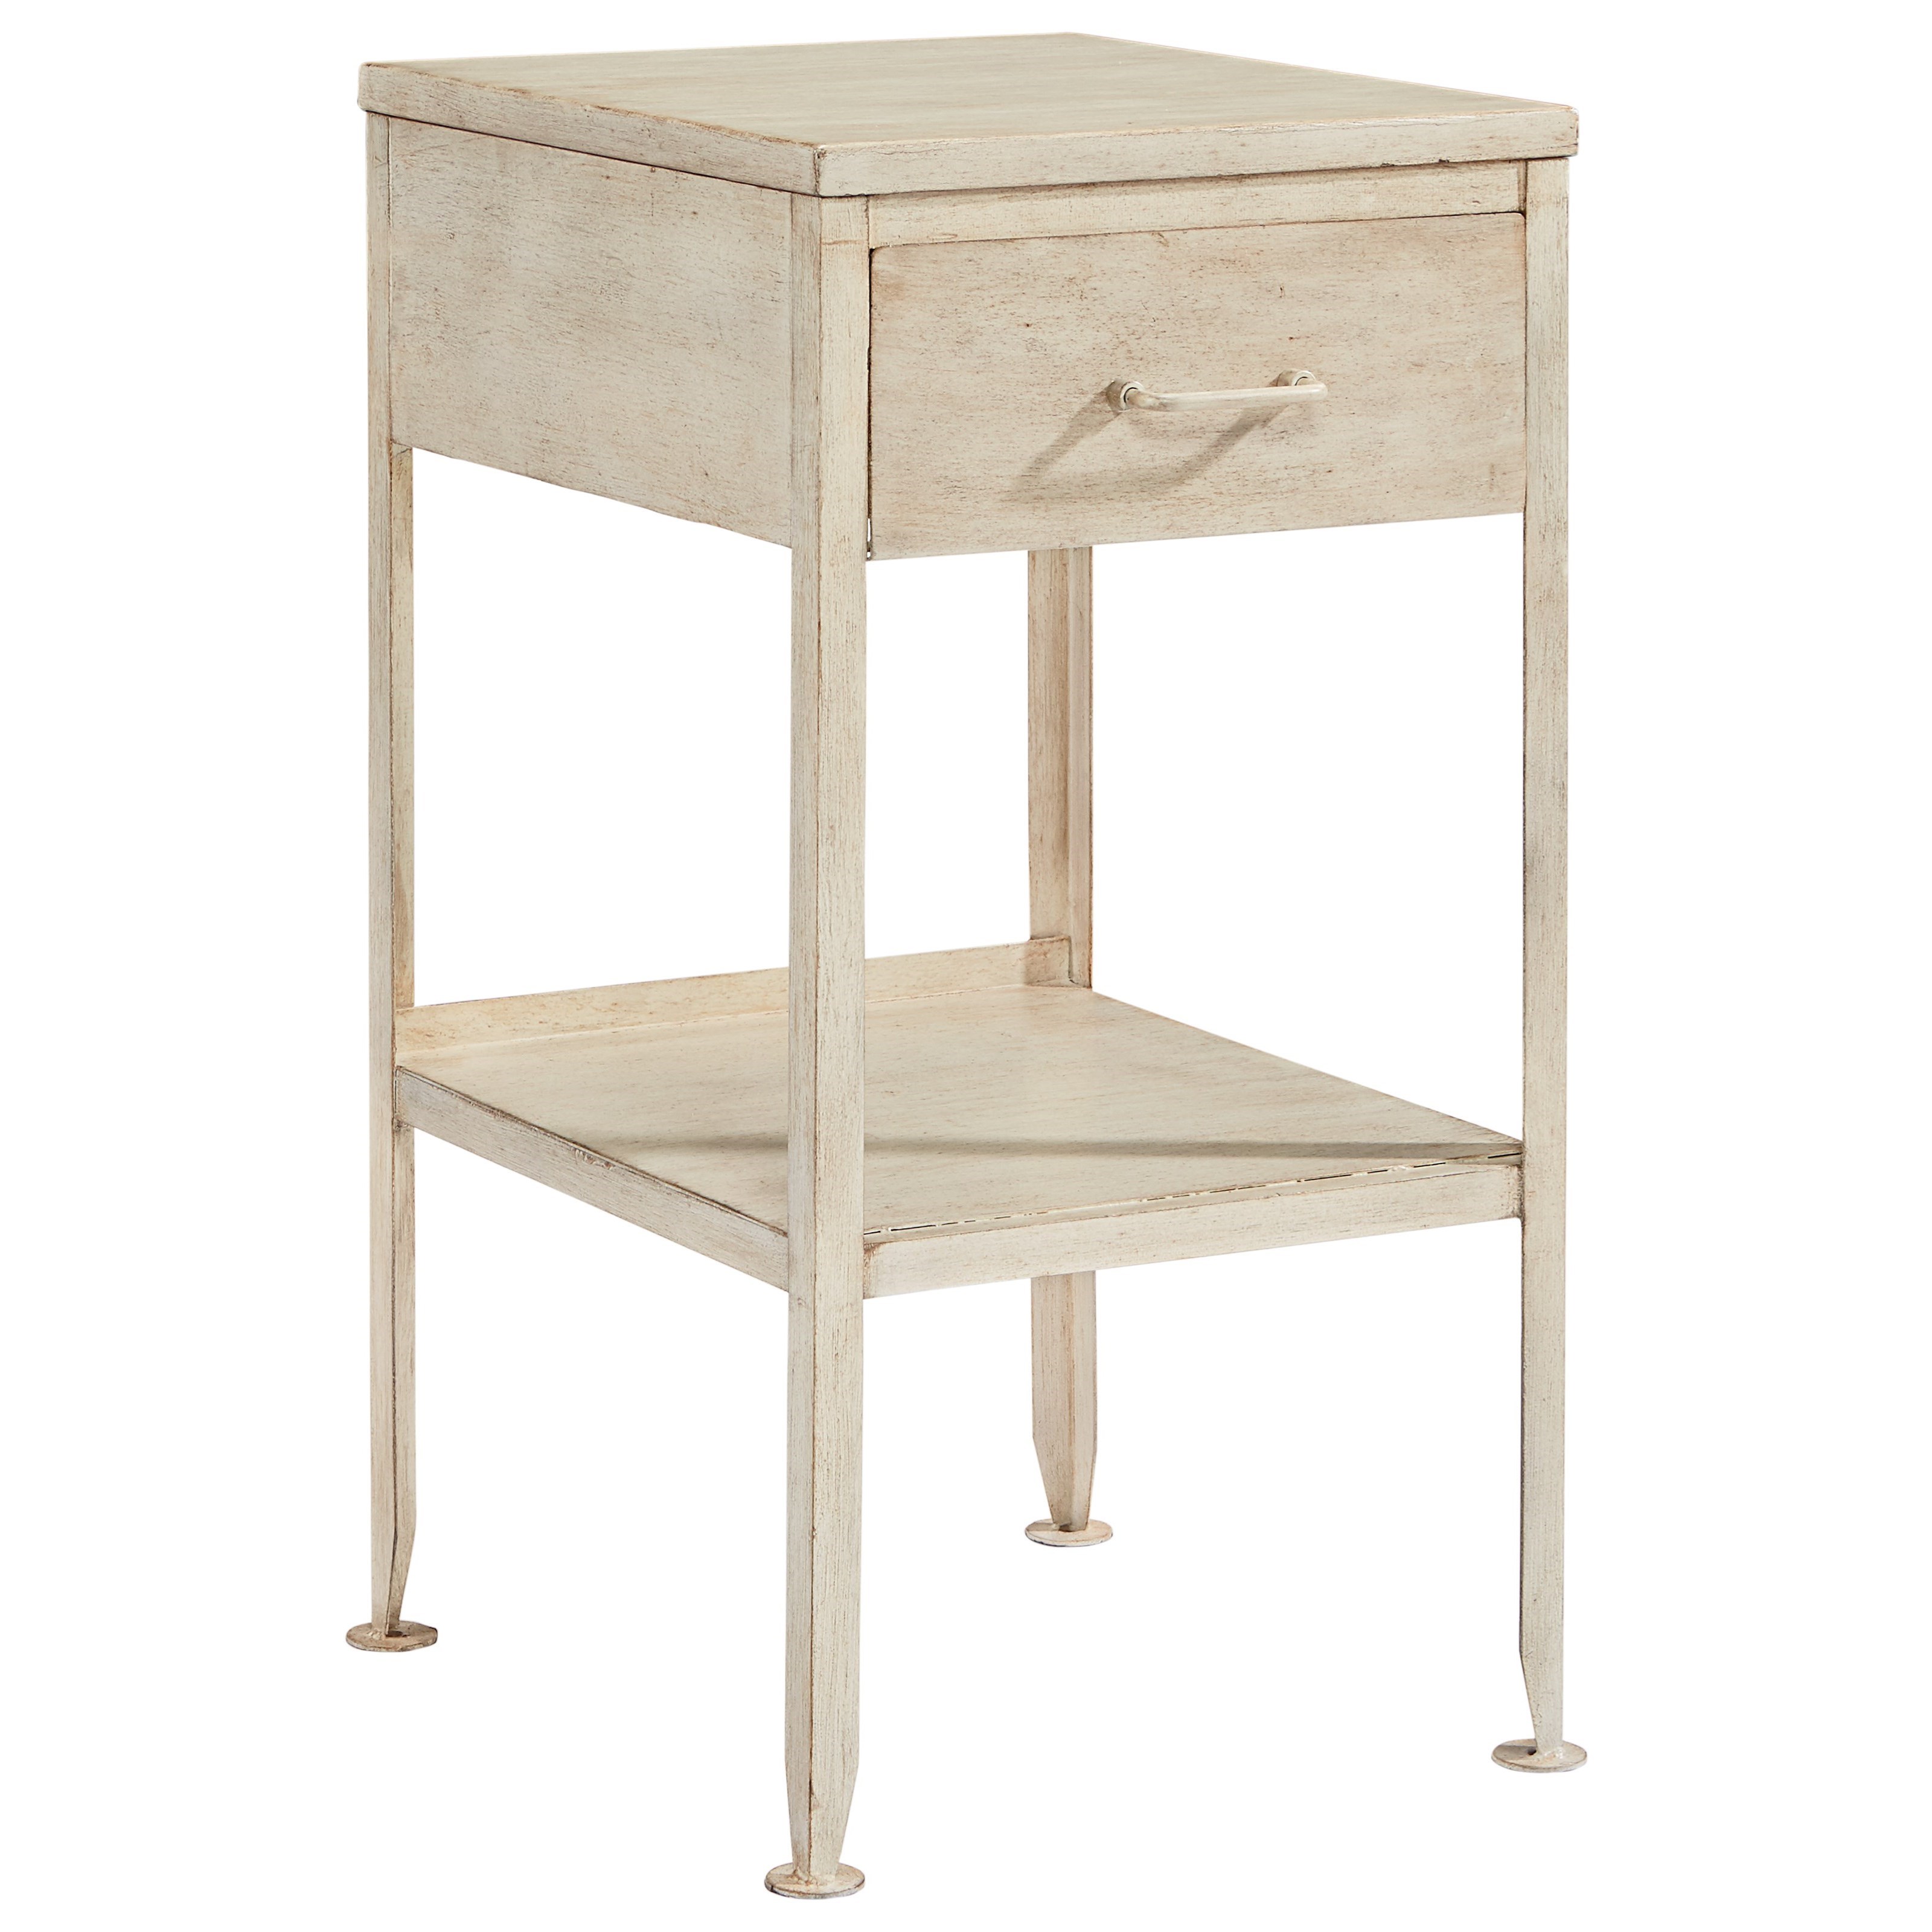 magnolia home joanna gaines accent elements small metal end table products color with drawer side dining room suites maple furniture tory burch pearl necklace outdoor patio tables